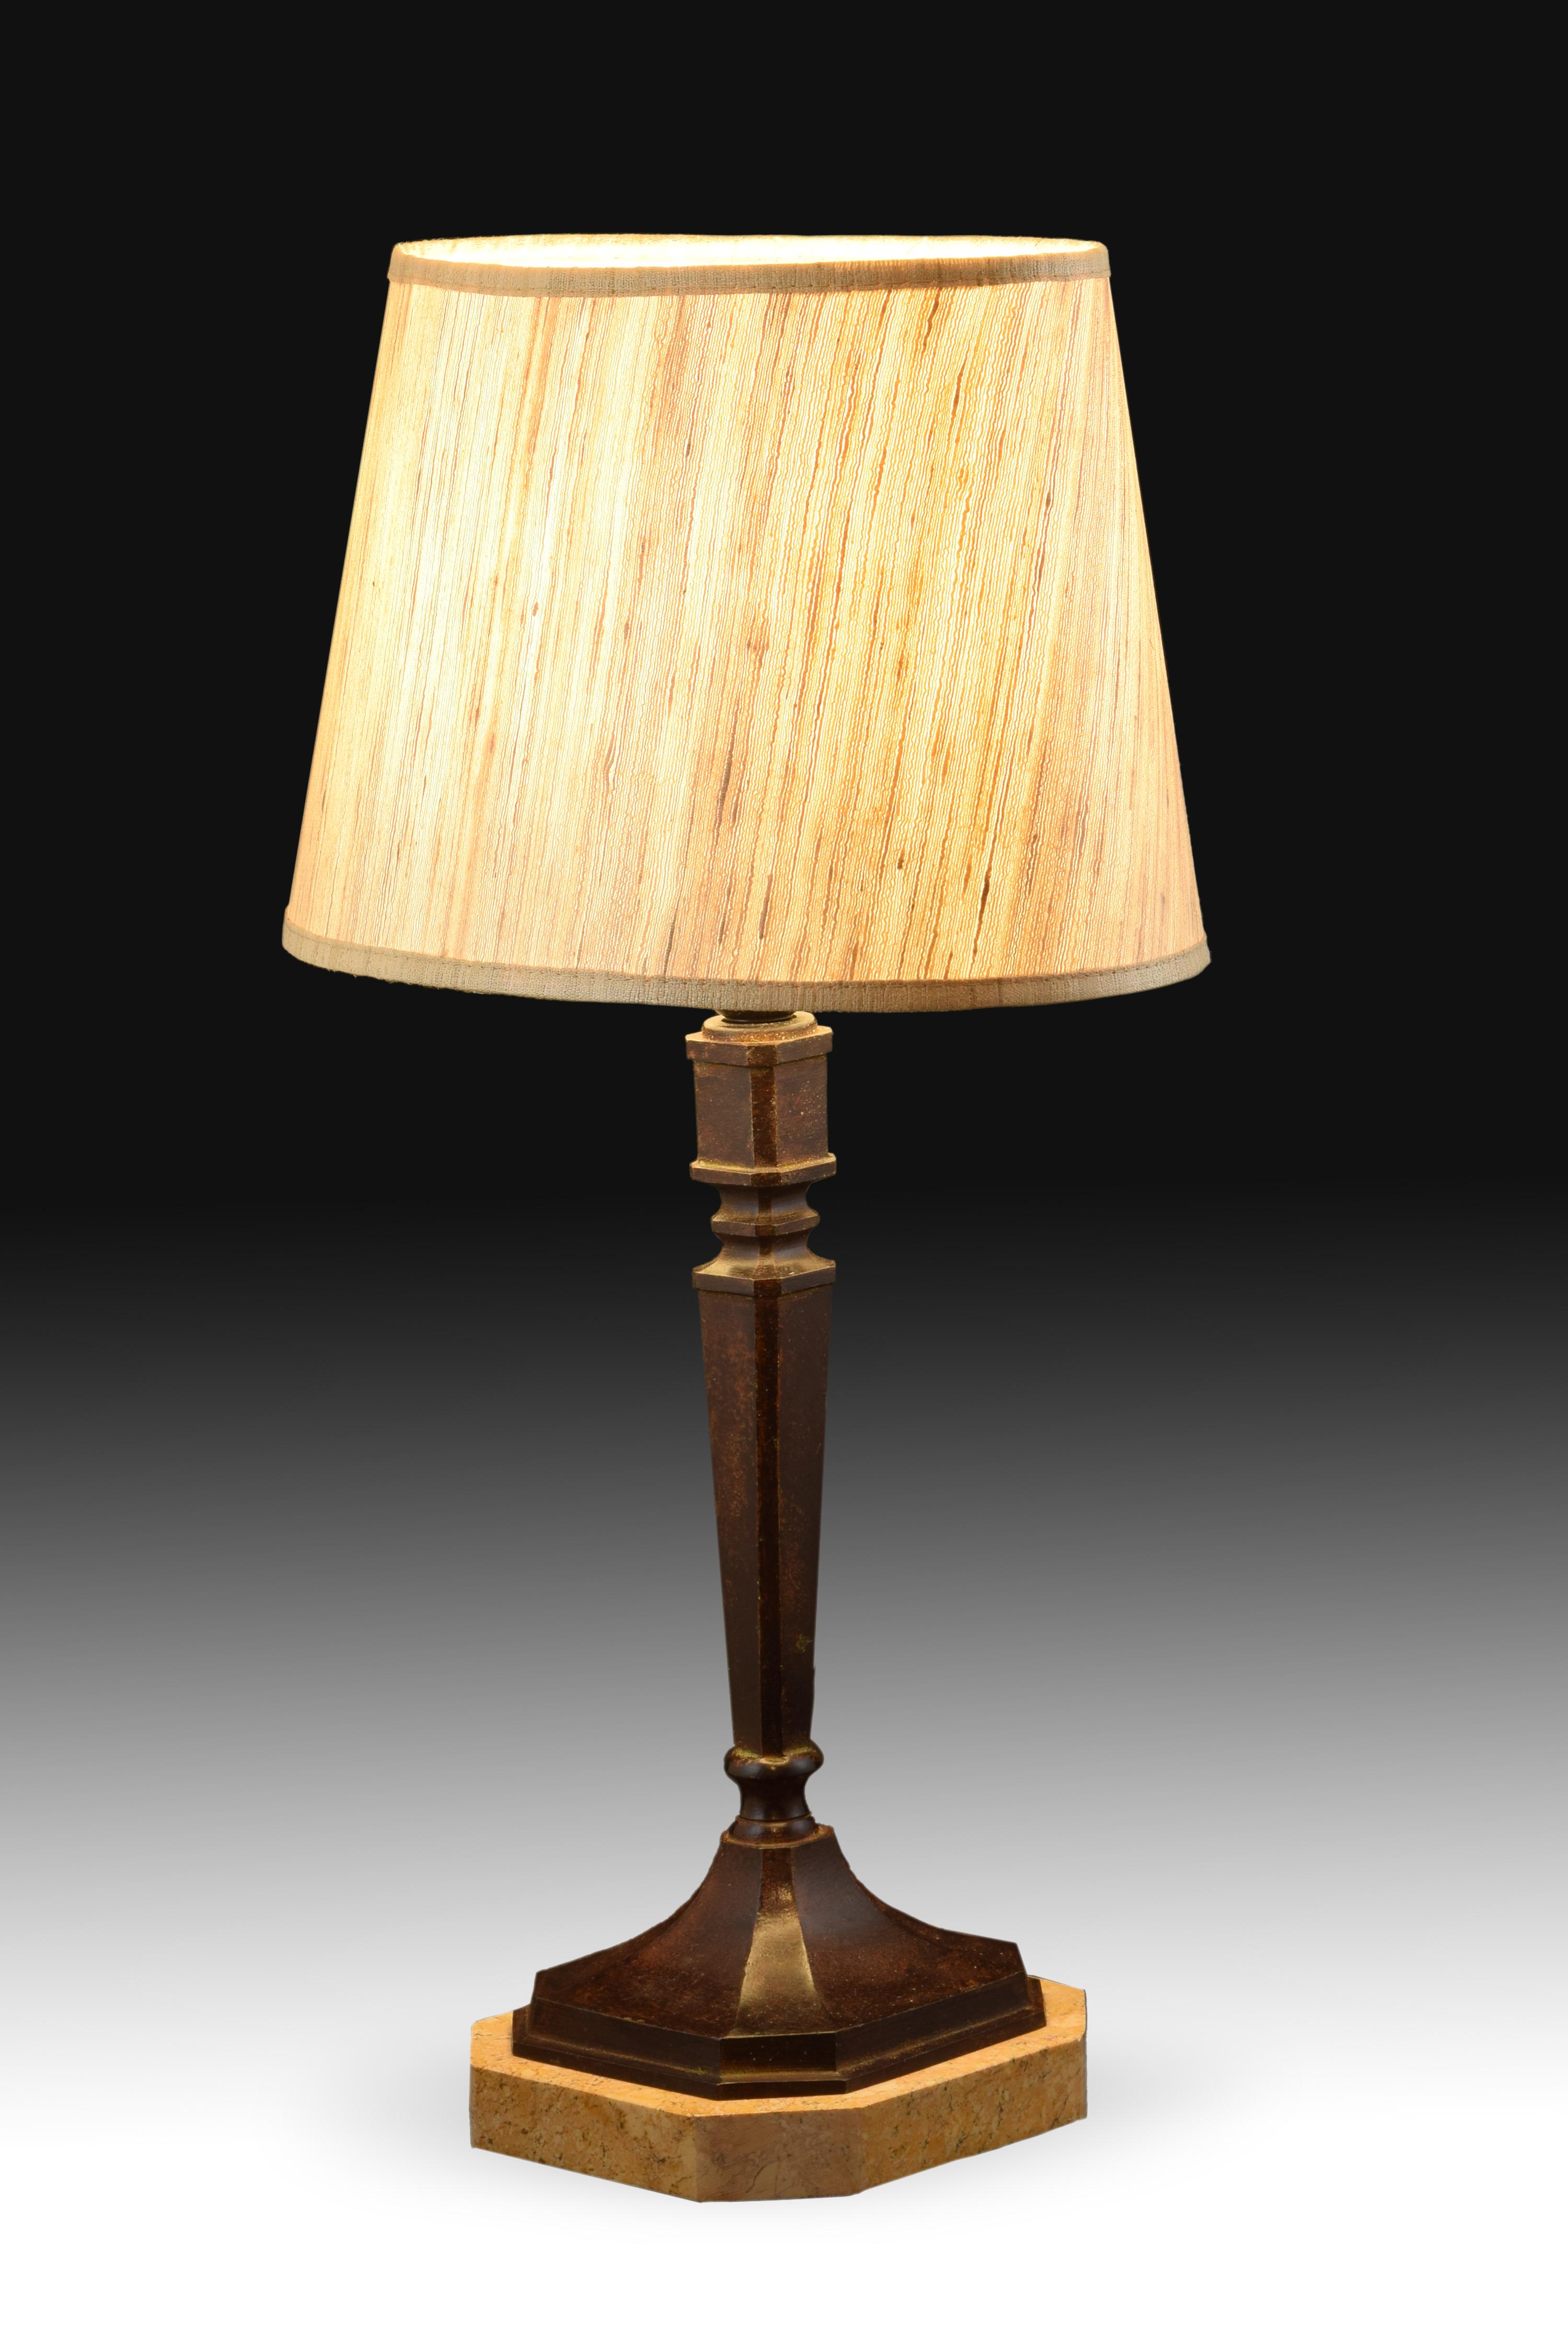 European Estipite Shaped Lamp, Patinated Bronze, Marble Base, Shade Not Included